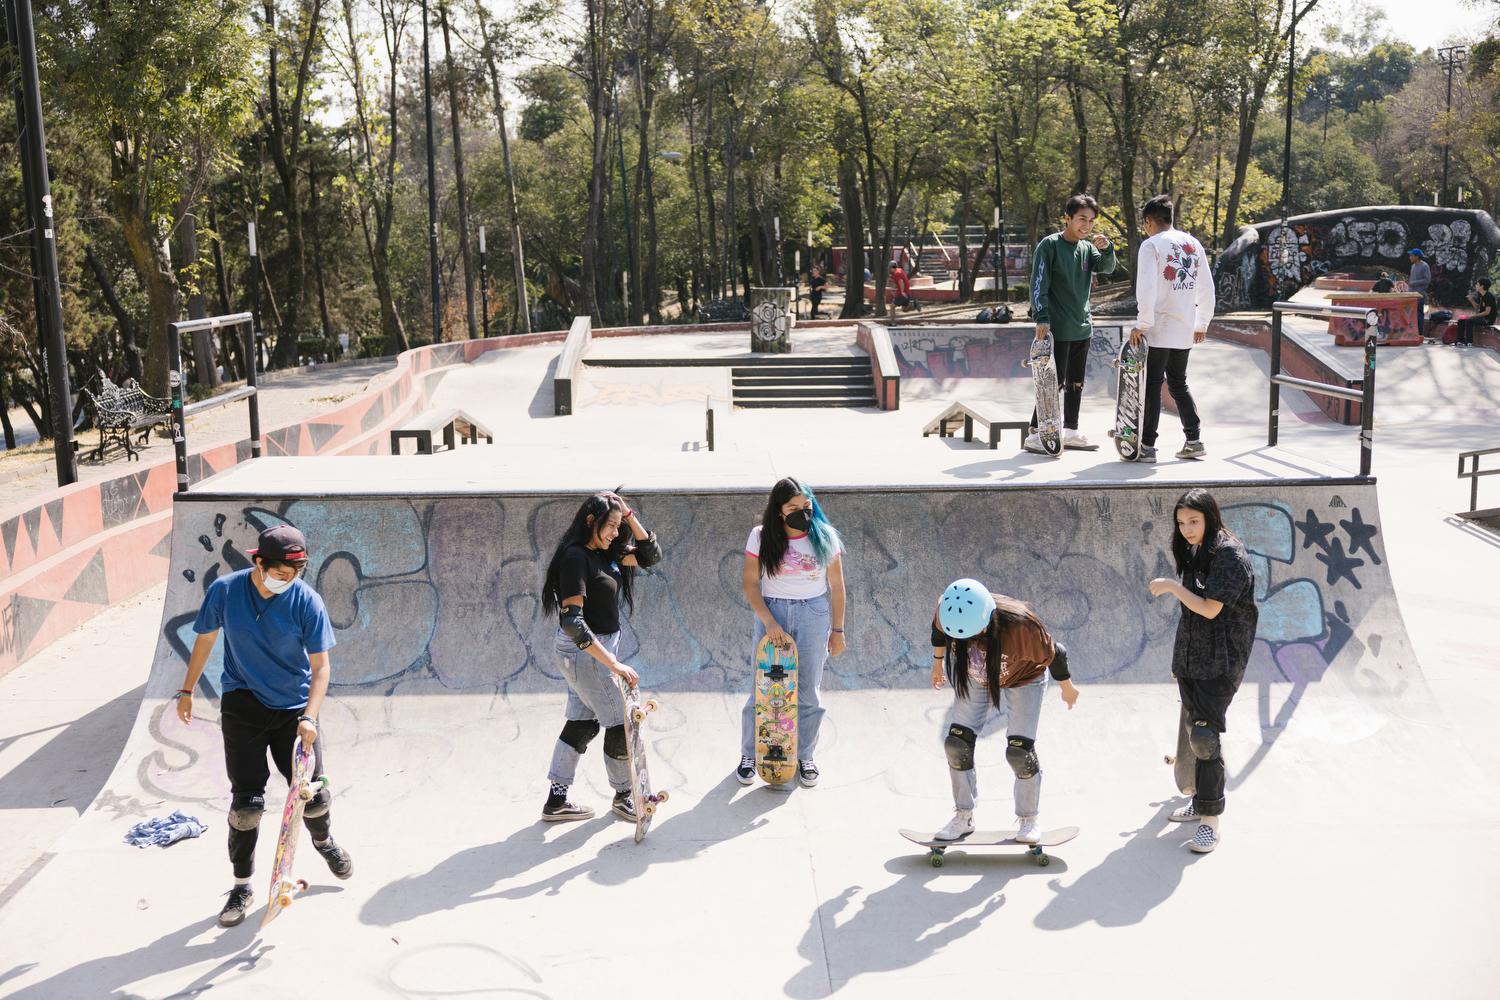 Mexico City, Mexico. January 8, 2021. A group of girls skateboard at Parque Lira Skatepark in...